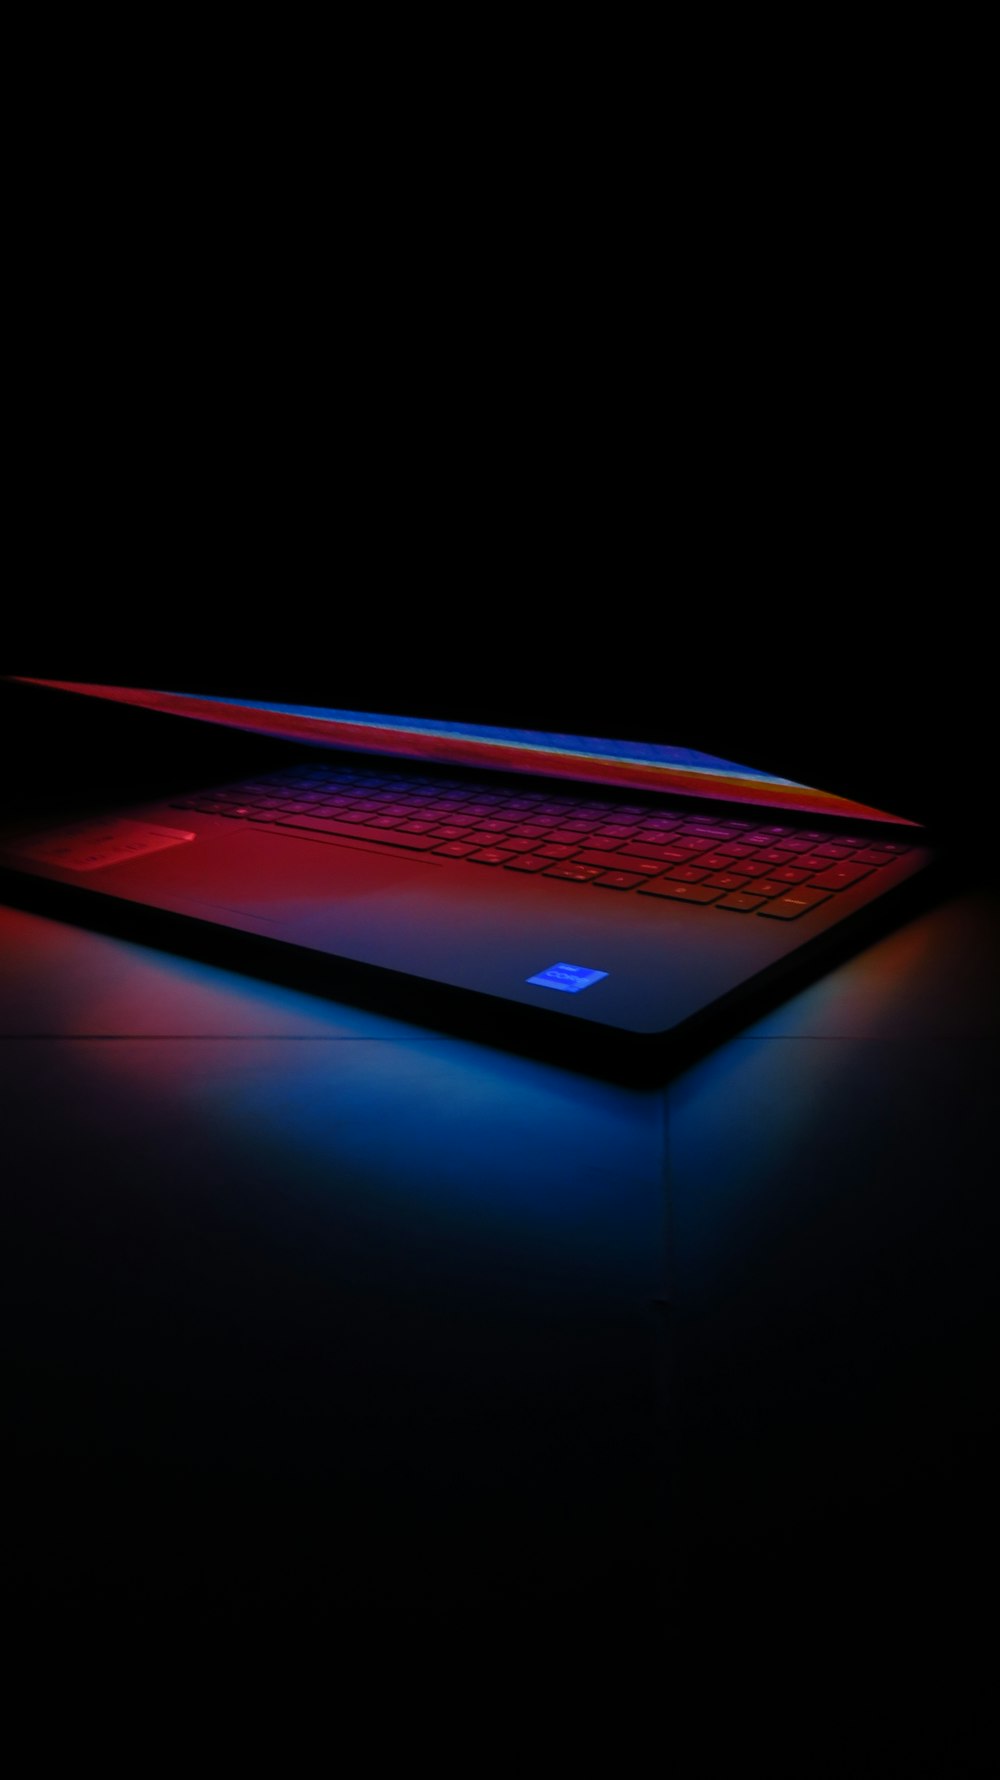 A laptop with a red light photo – Free Laptop Image on Unsplash